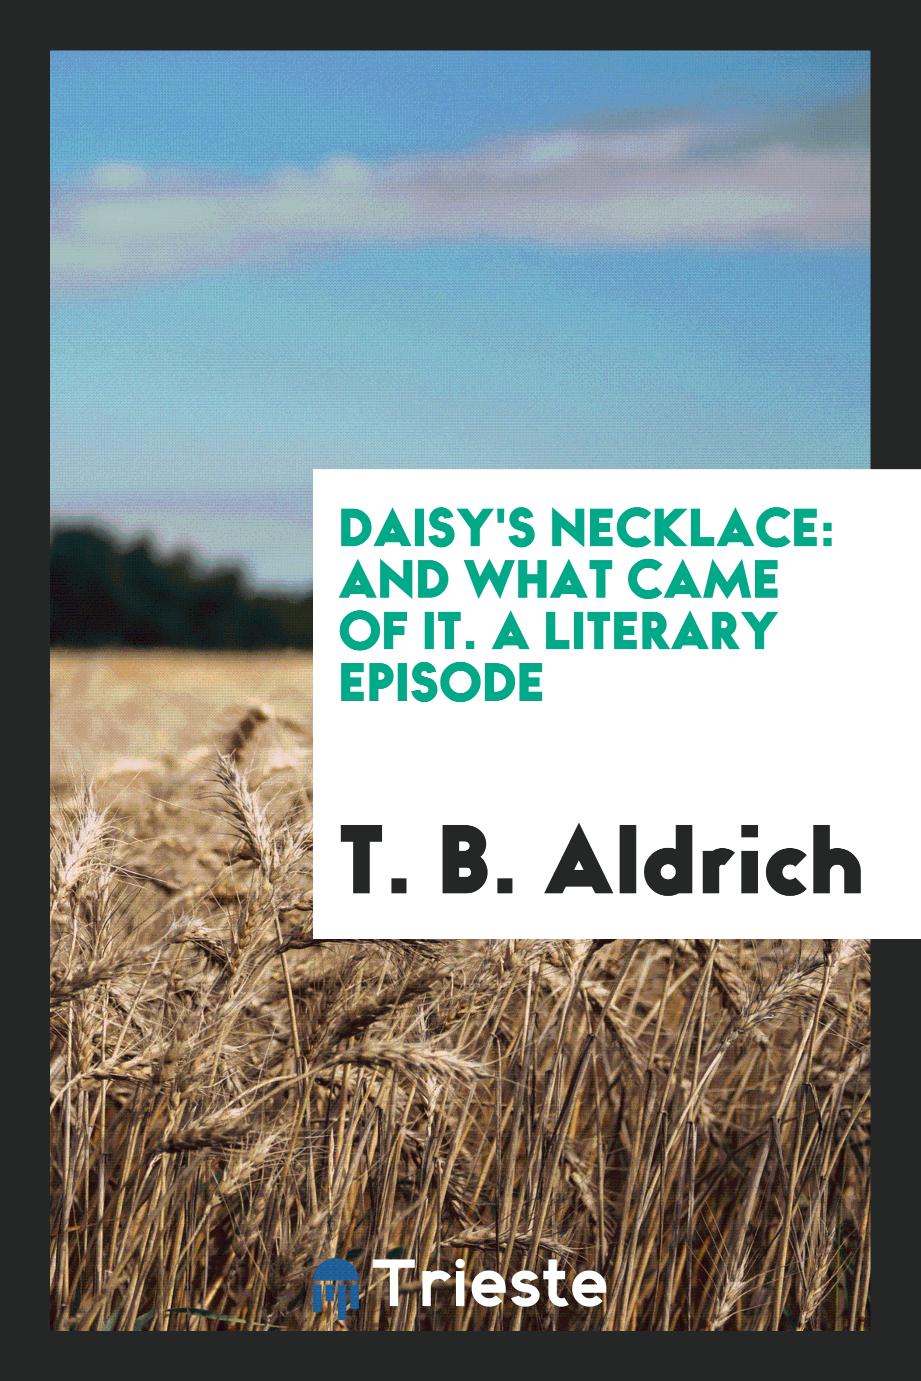 Daisy's necklace: and what came of it. A literary episode